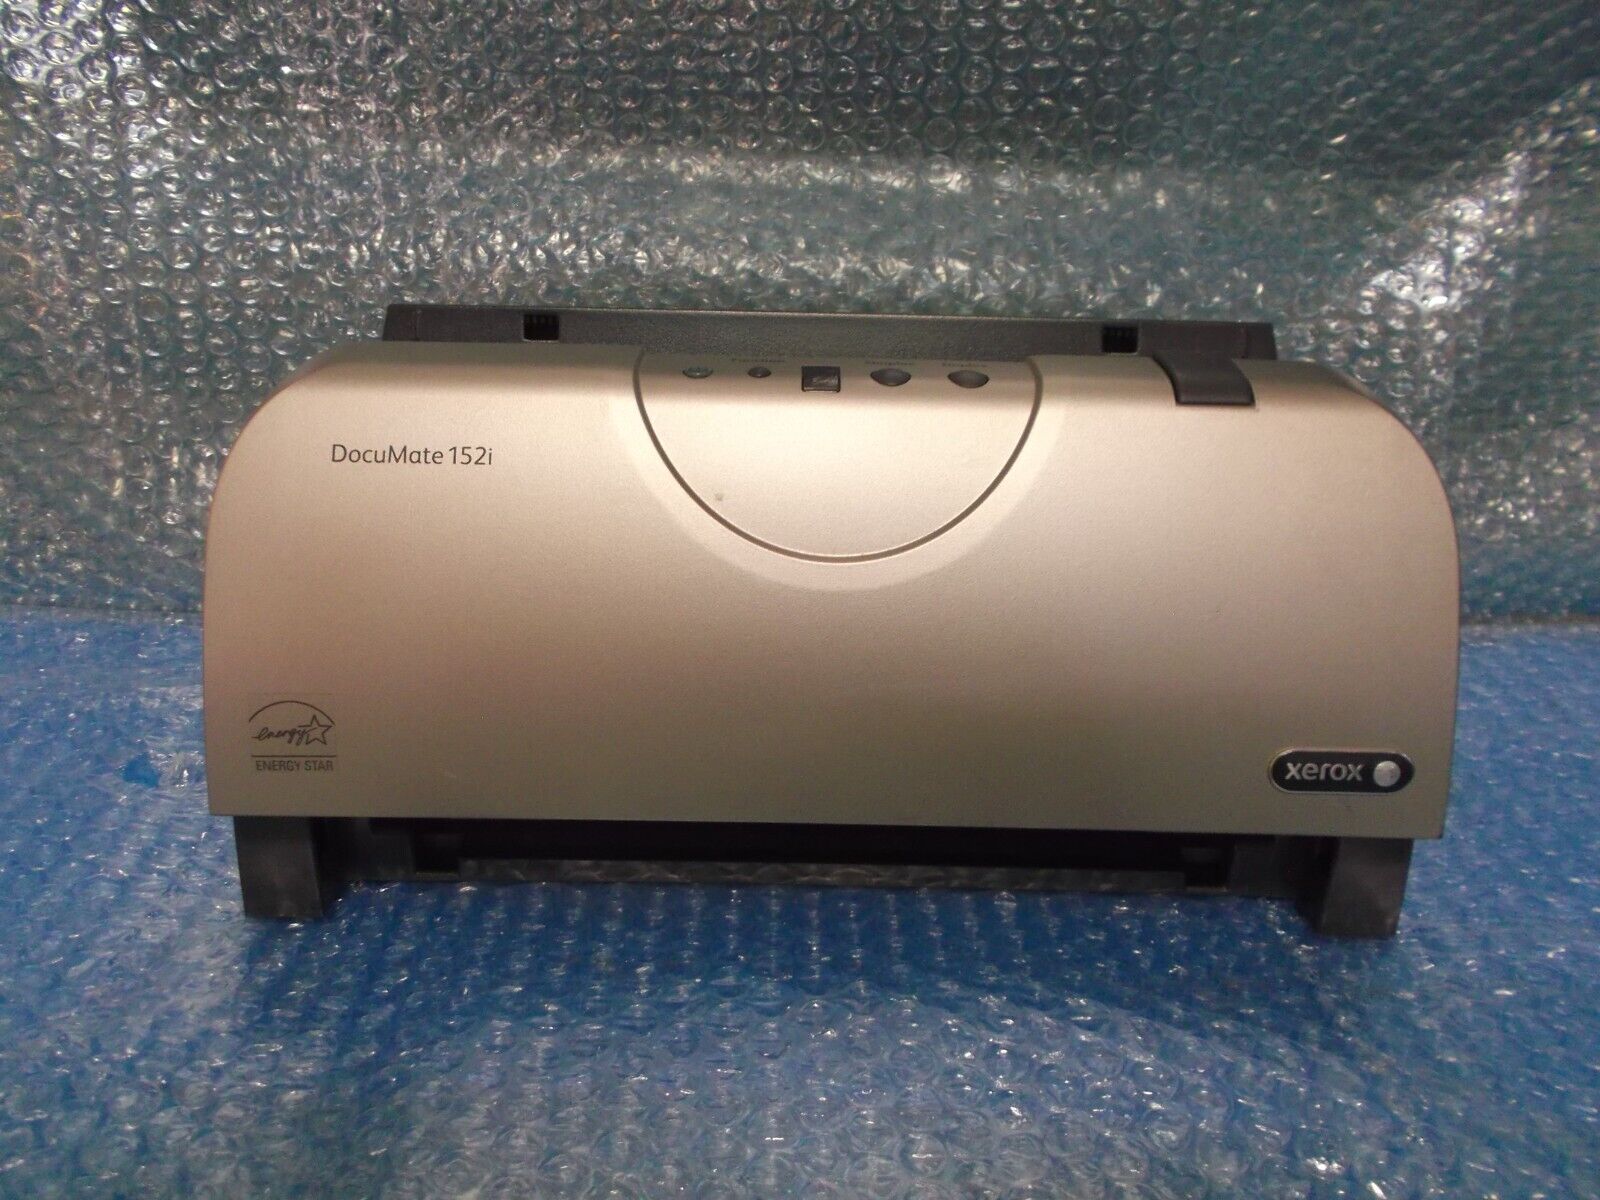 XEROX DOCUMATE 152i 85-0317-000 SHEETFED SCANNER -FOR PARTS